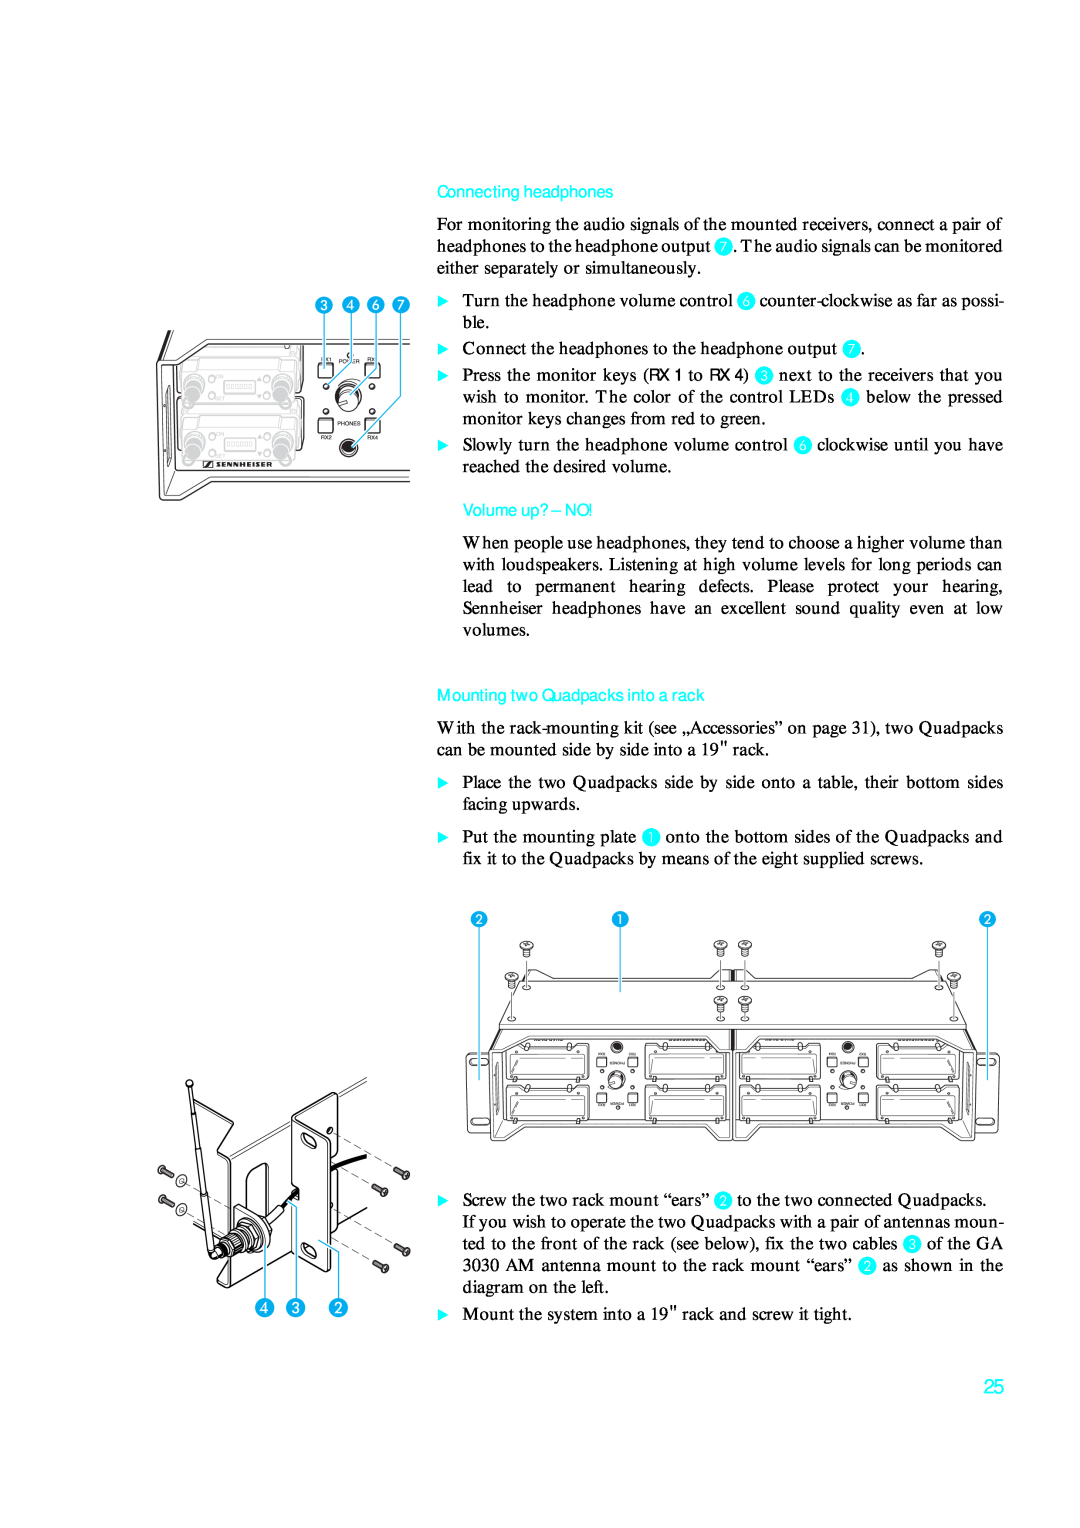 Sennheiser qp 3041 instruction manual Connecting headphones, Volume up? - NO, Mounting two Quadpacks into a rack, D C B 